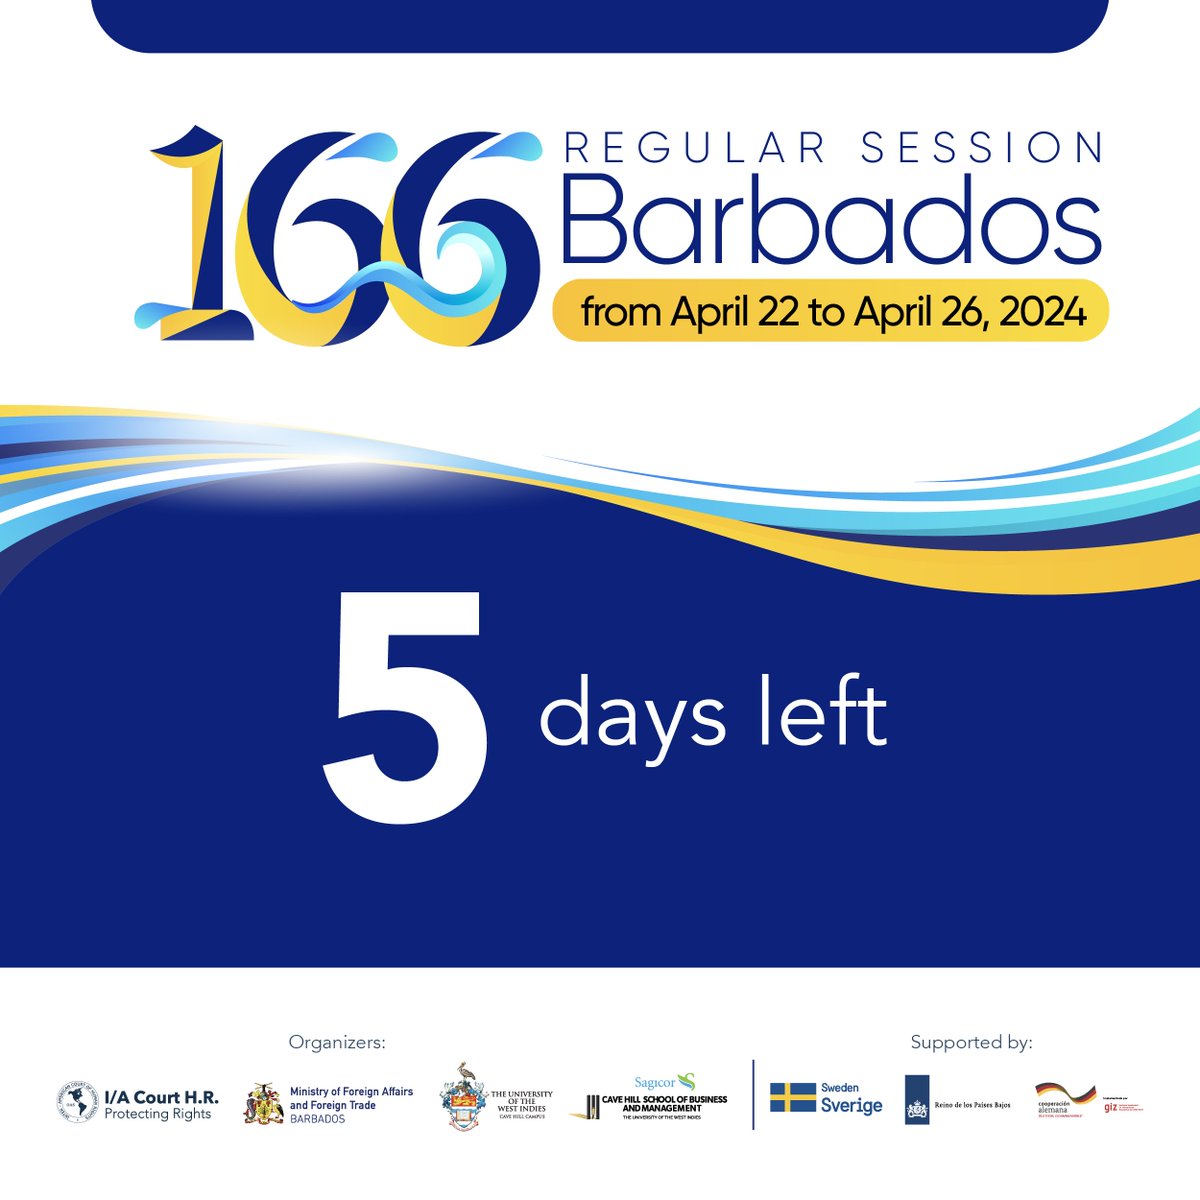 🚨 Only 5 days until the start of the 166th Regular Session of the IACHR in Barbados! Don't miss the International Seminar and Public Hearing on the Request for Advisory Opinion on Climate Emergency and Human Rights 🌿📷. More details🔍 bit.ly/3U5O7uI